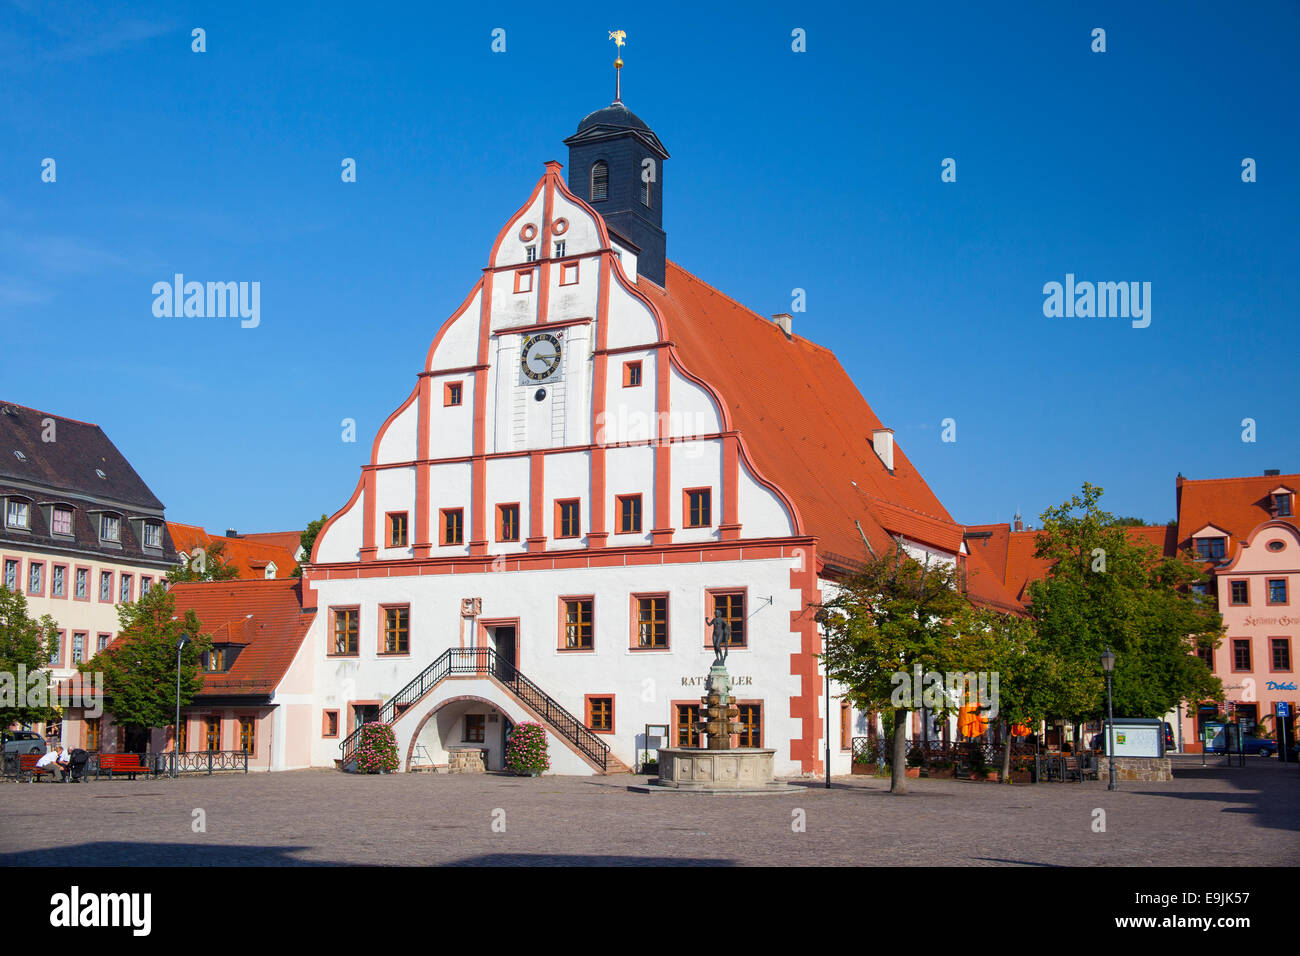 Market square and Town Hall, Grimma, Saxony, Germany Stock Photo